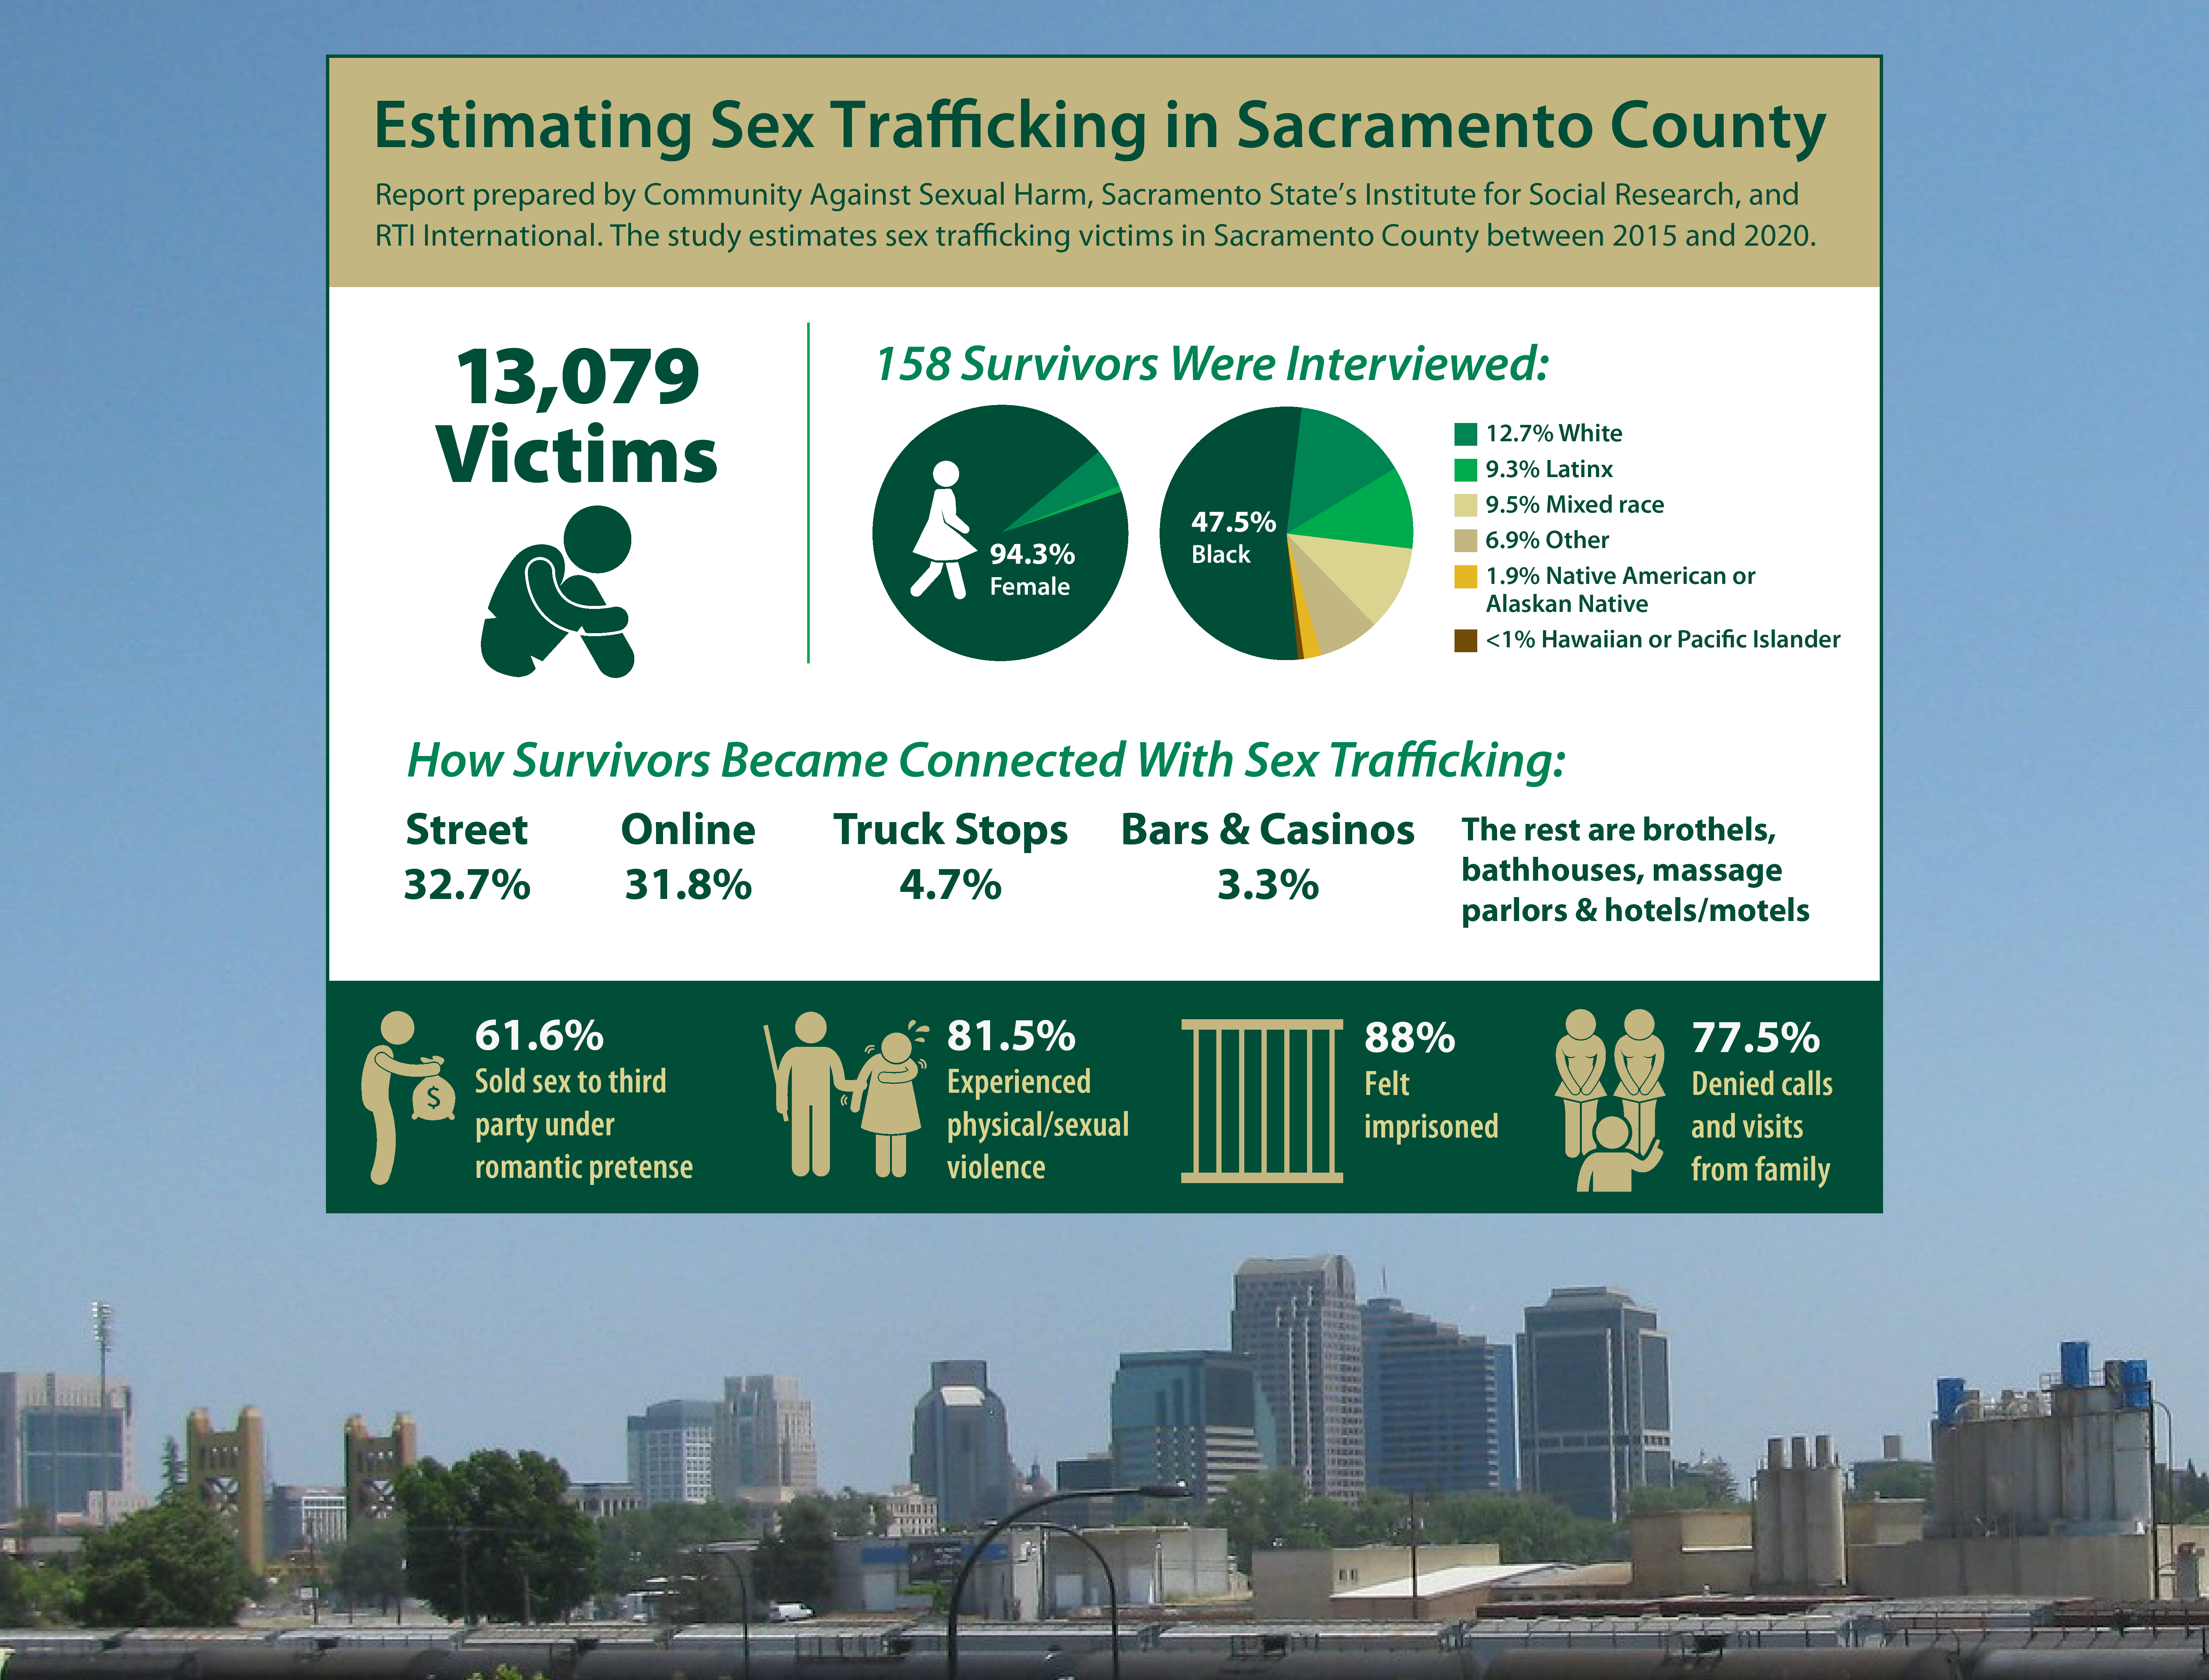 Sac State’s Institute For Social Research Helps Document Alarming Level Of Sex Trafficking In